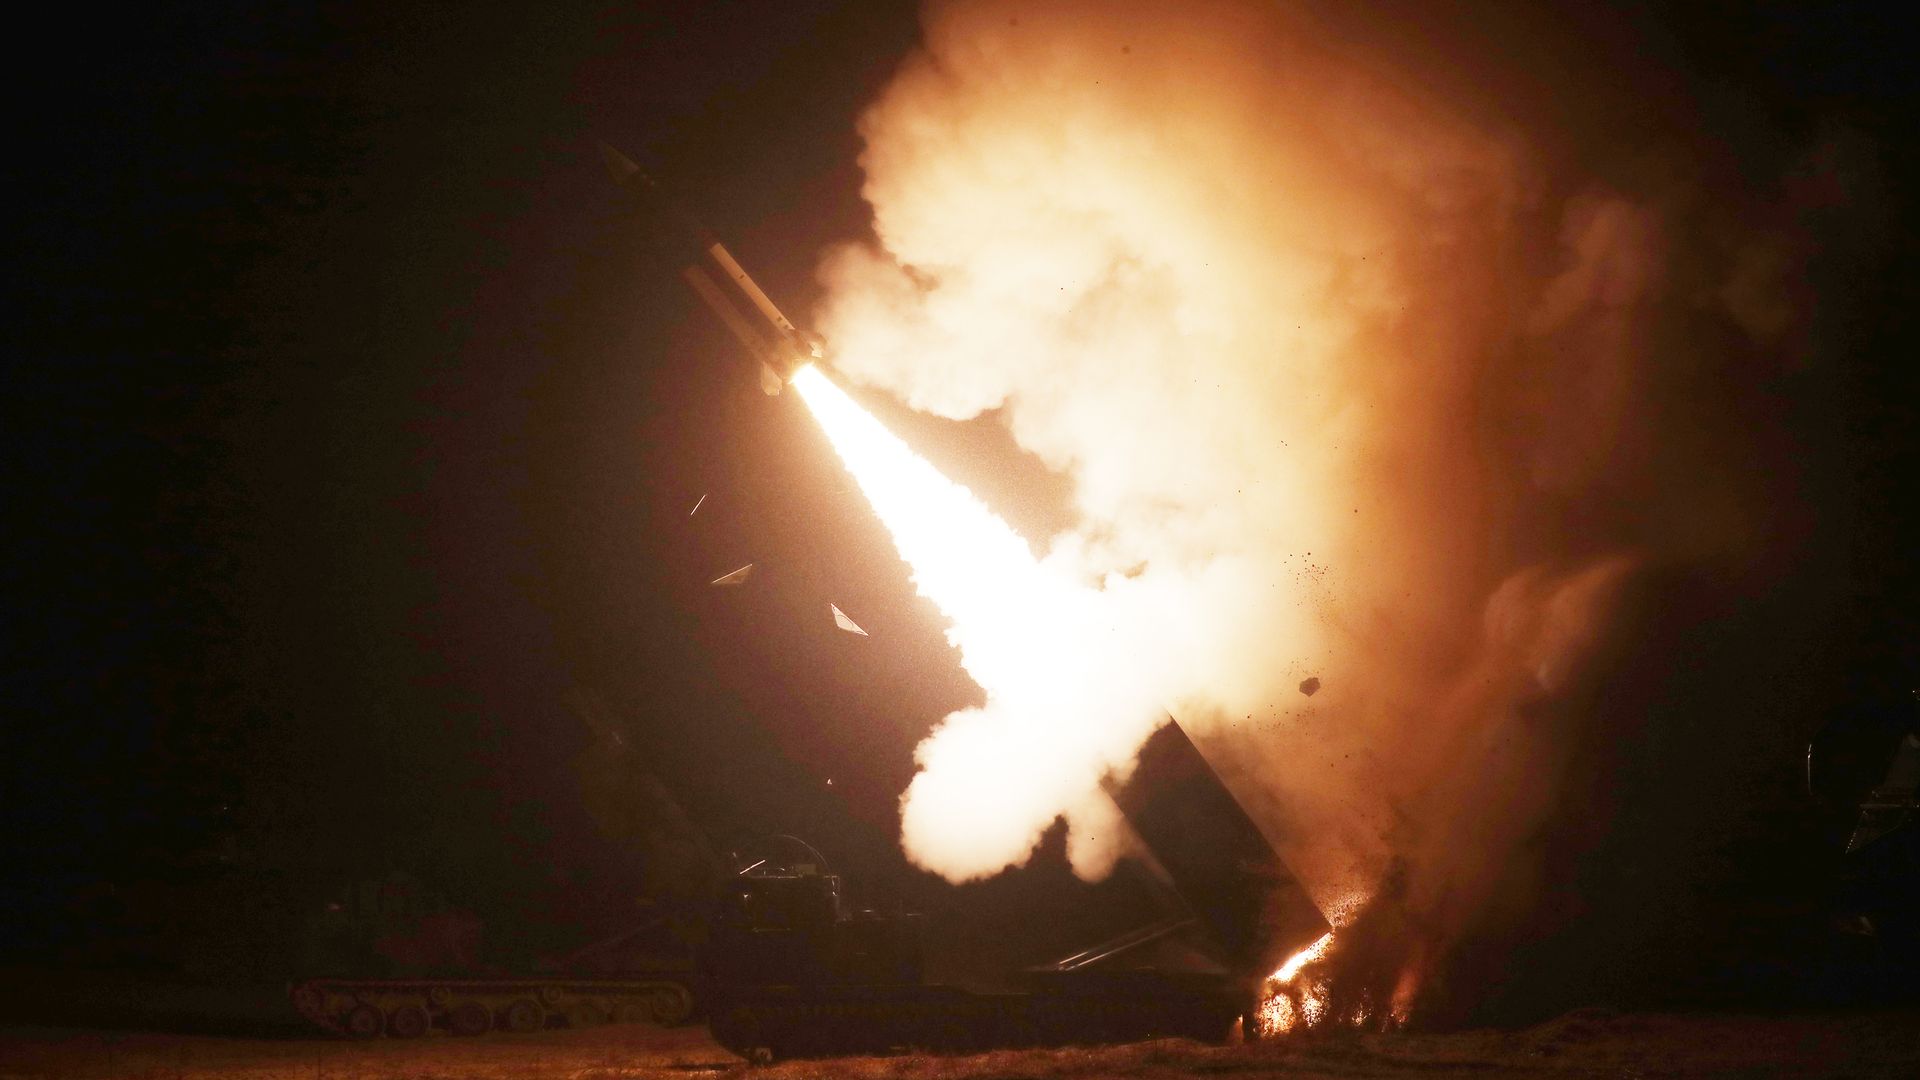 An Army Tactical Missile System (ATACMS) is fired during a joint training between the US and South Korea, on October 05, 2022 at an undisclosed location.